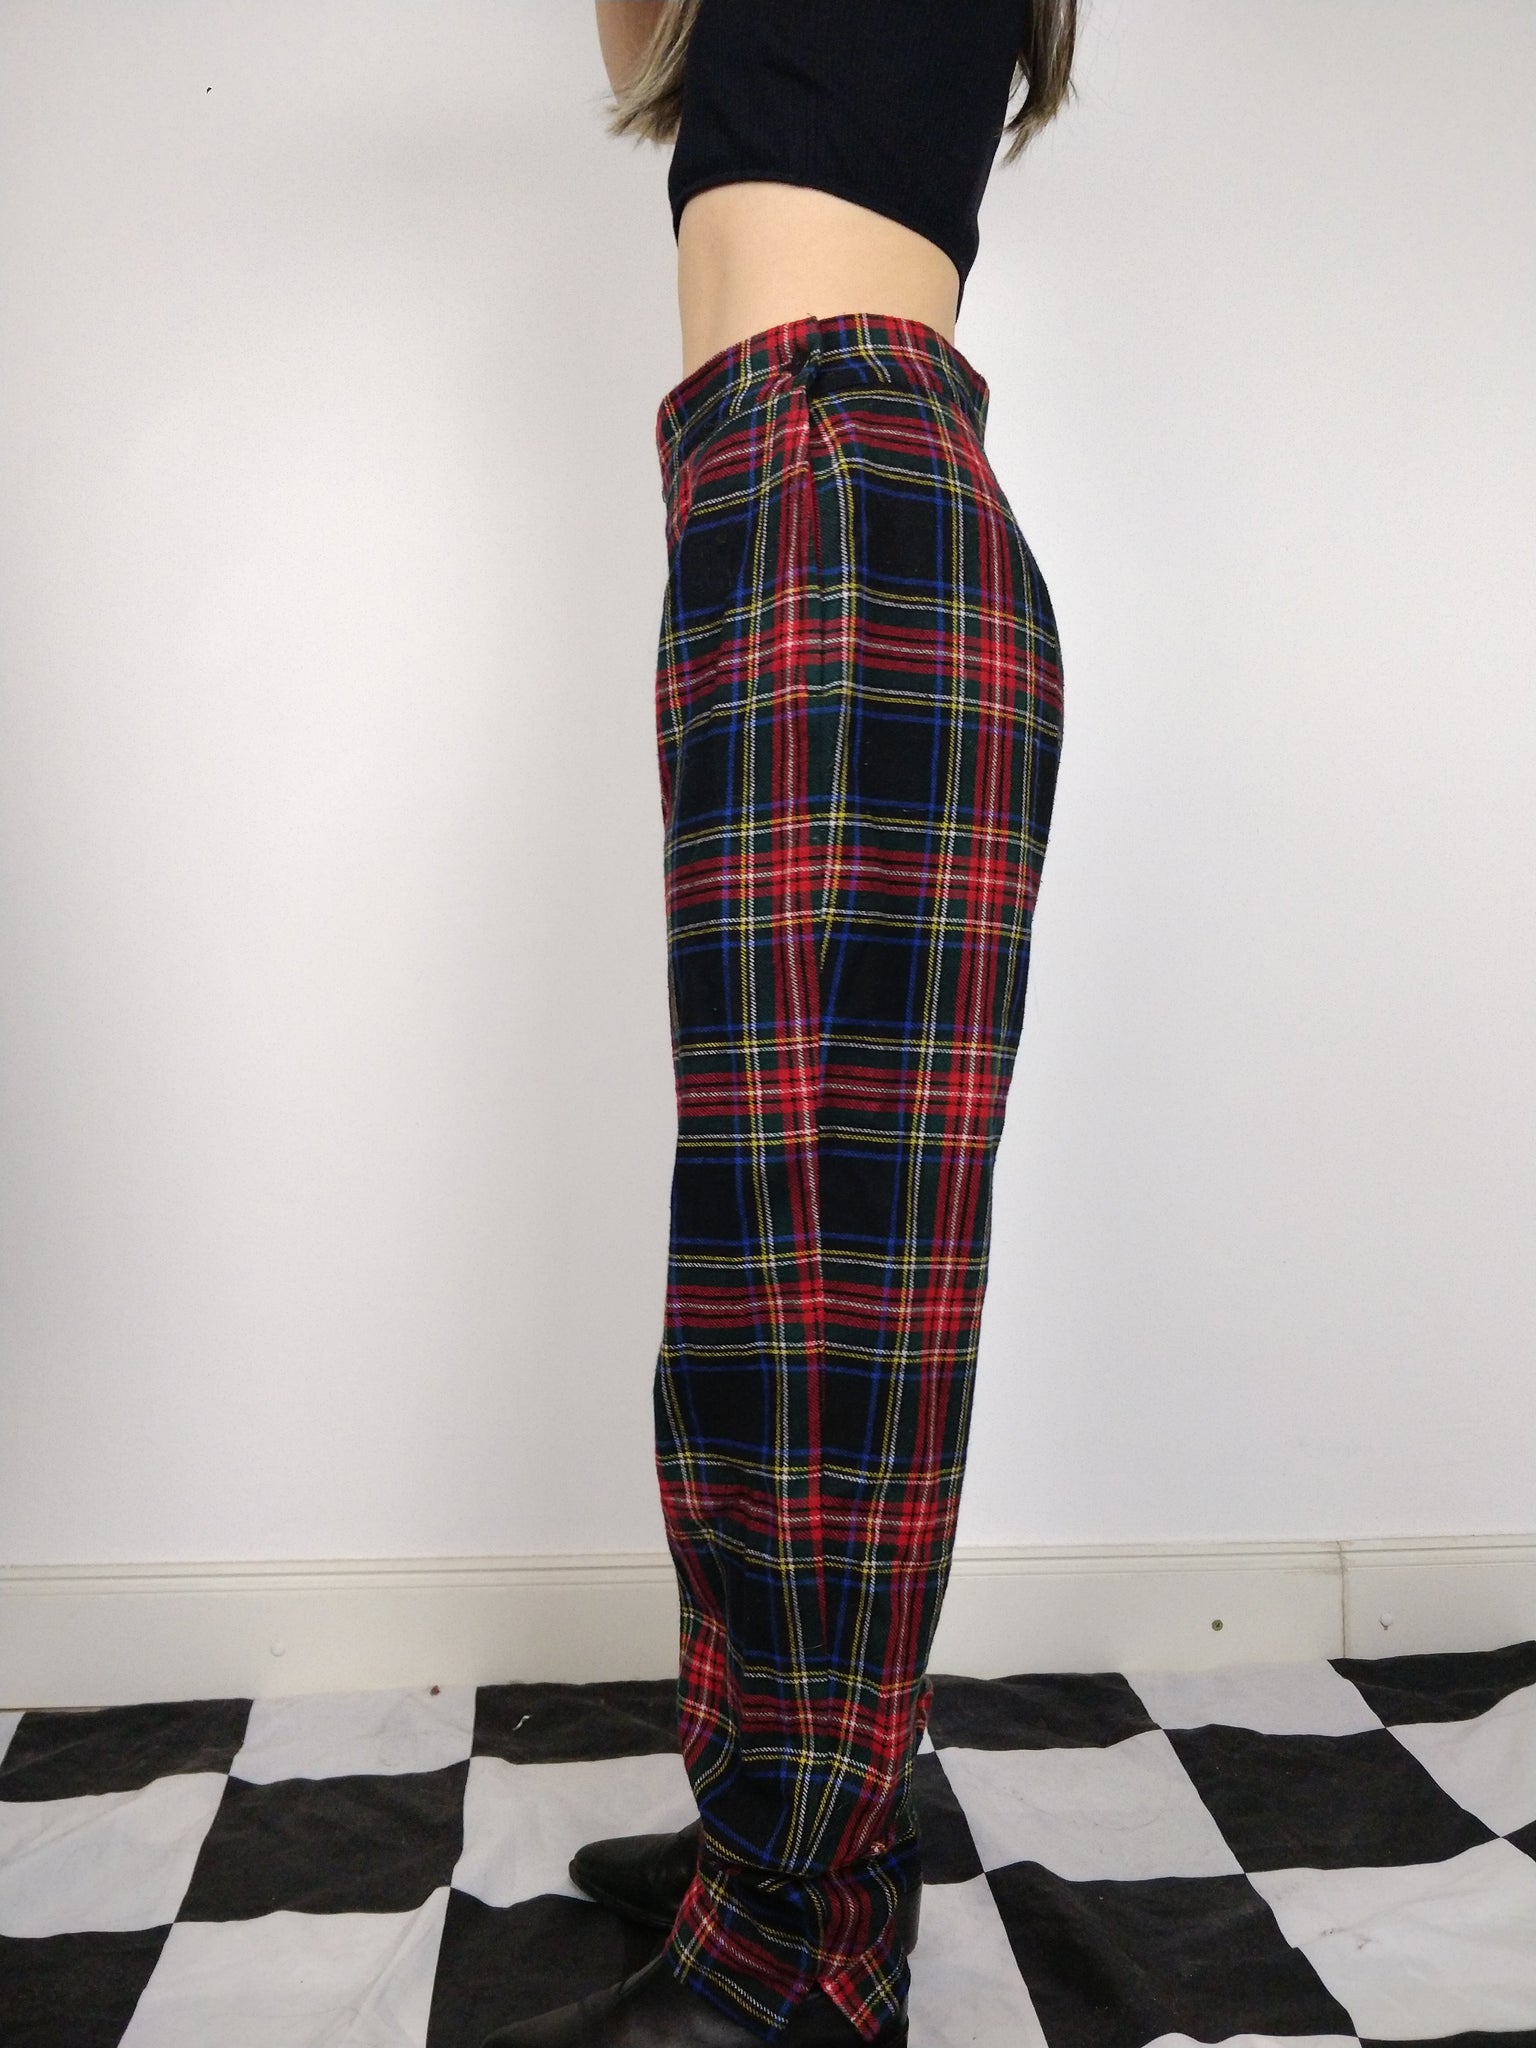 Christmas Red Checkered Flannel Pants For Men - Bombay Trooper